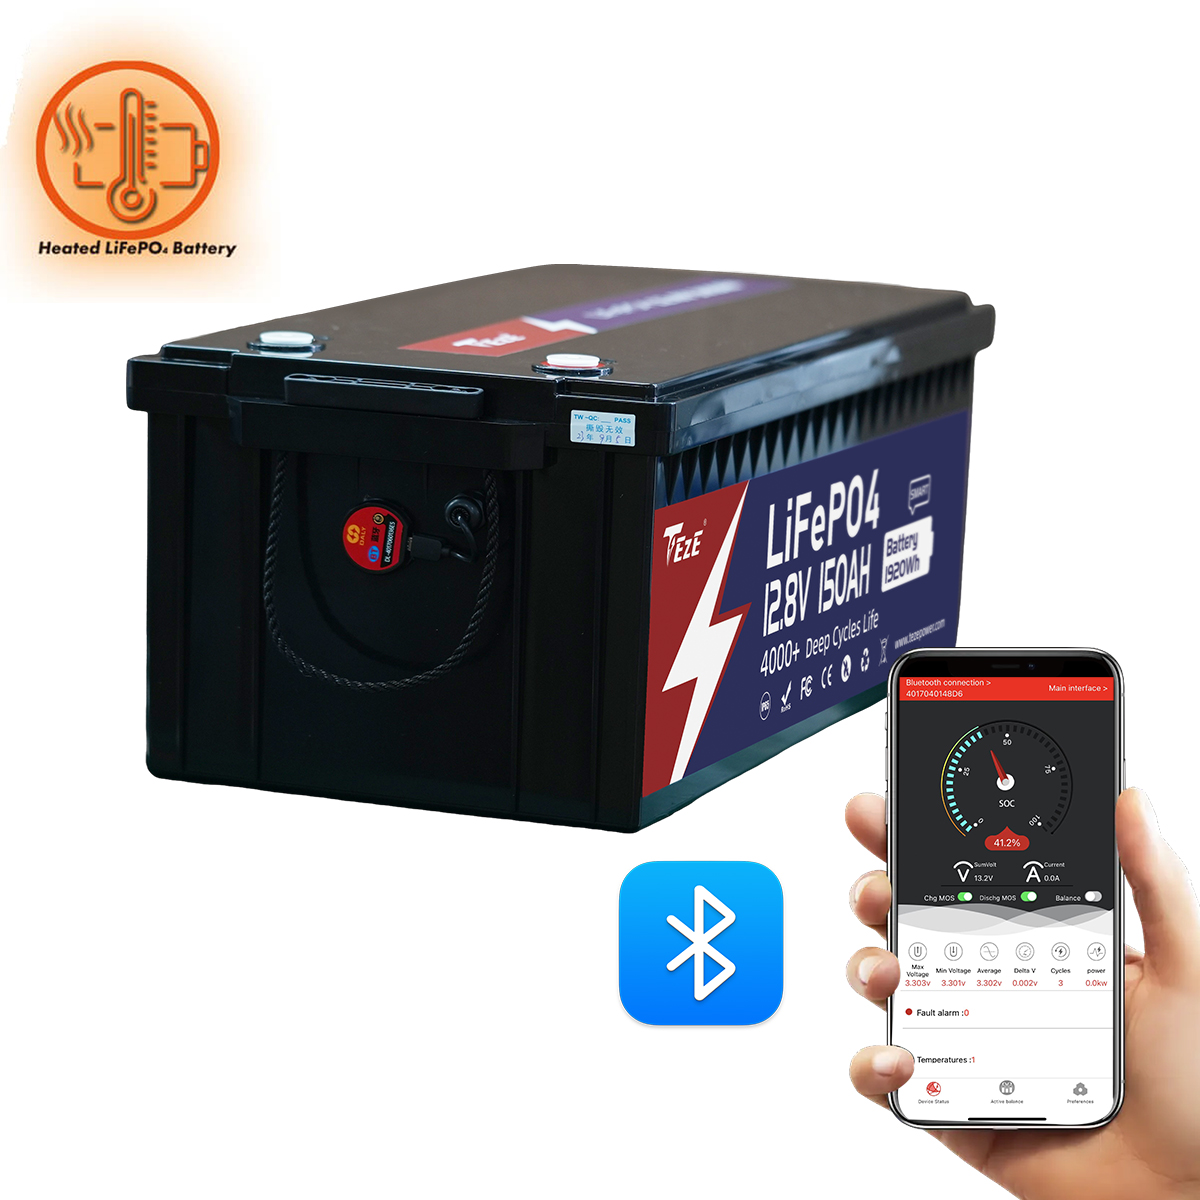 NEW-TezePower 12V150Ah LiFePO4 Battery with Bluetooth, Self-heating and Active Balancer, Built-in 150A Daly BMS (Bluetooth External Version)